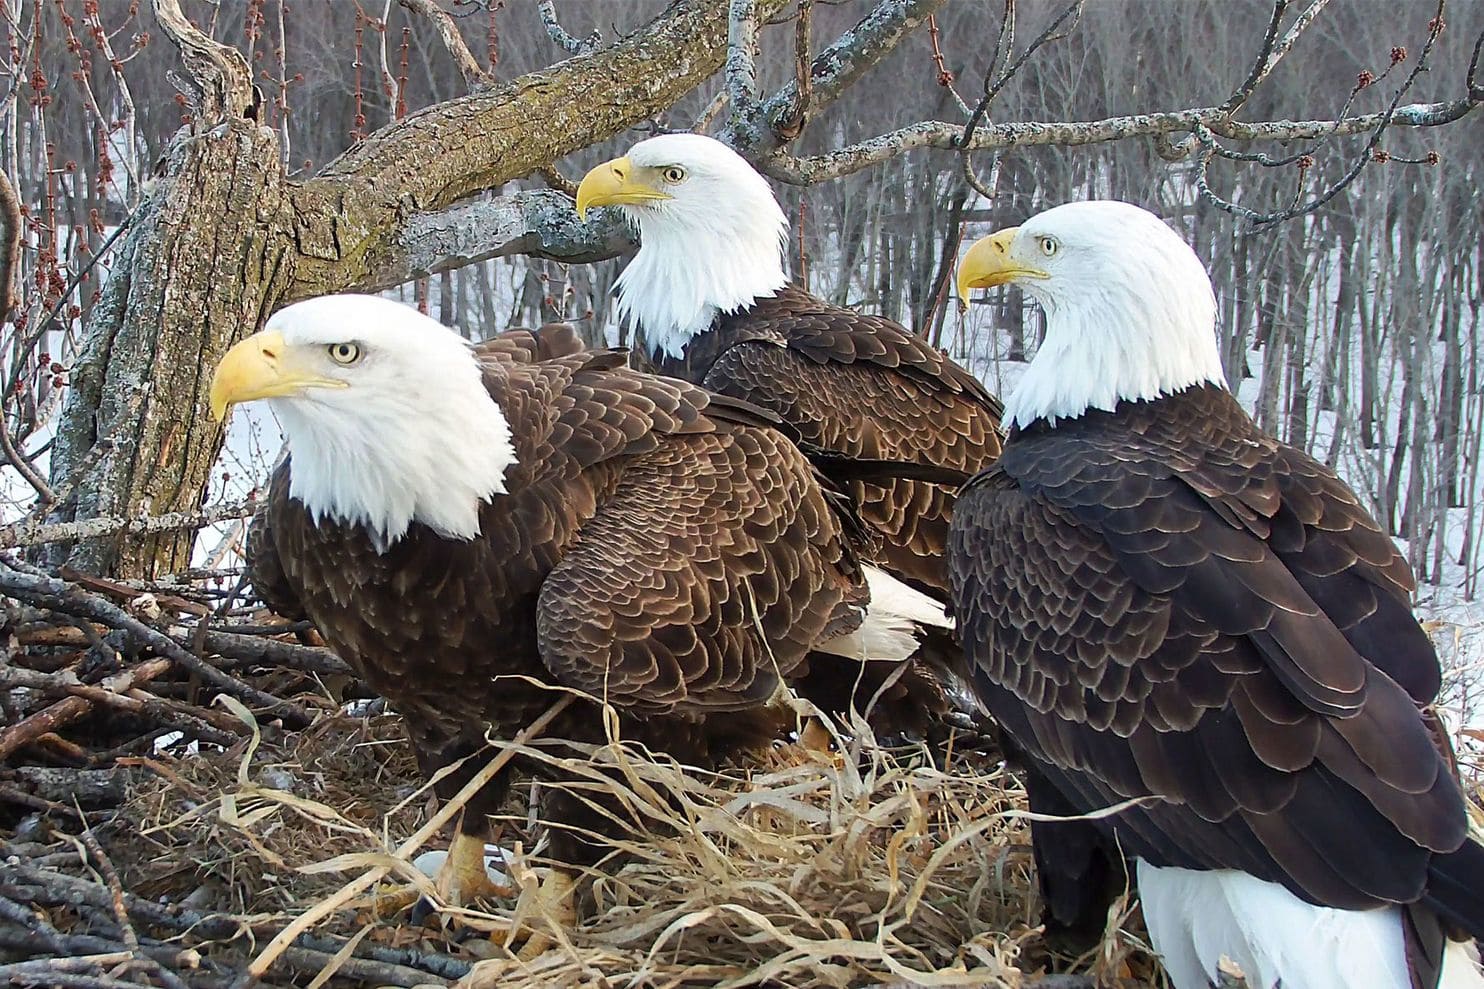 Valor I, Valor II, and Starr are raising three eaglets together in a nest in Illinois near the Mississippi River